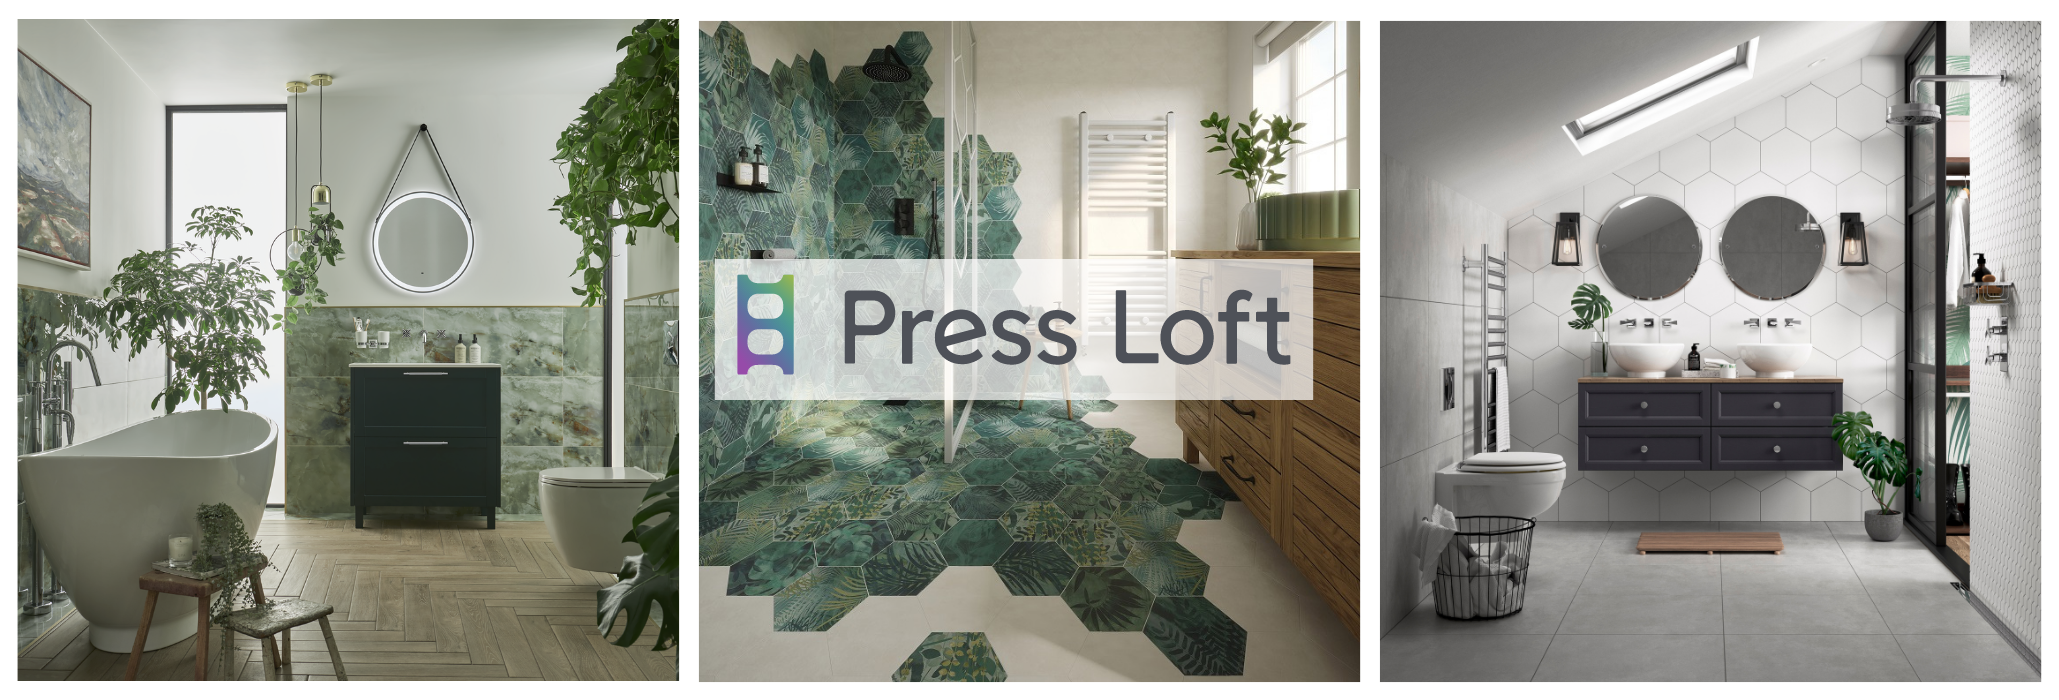 image of montage of bathroom images overlaid with a see through pressloft logo